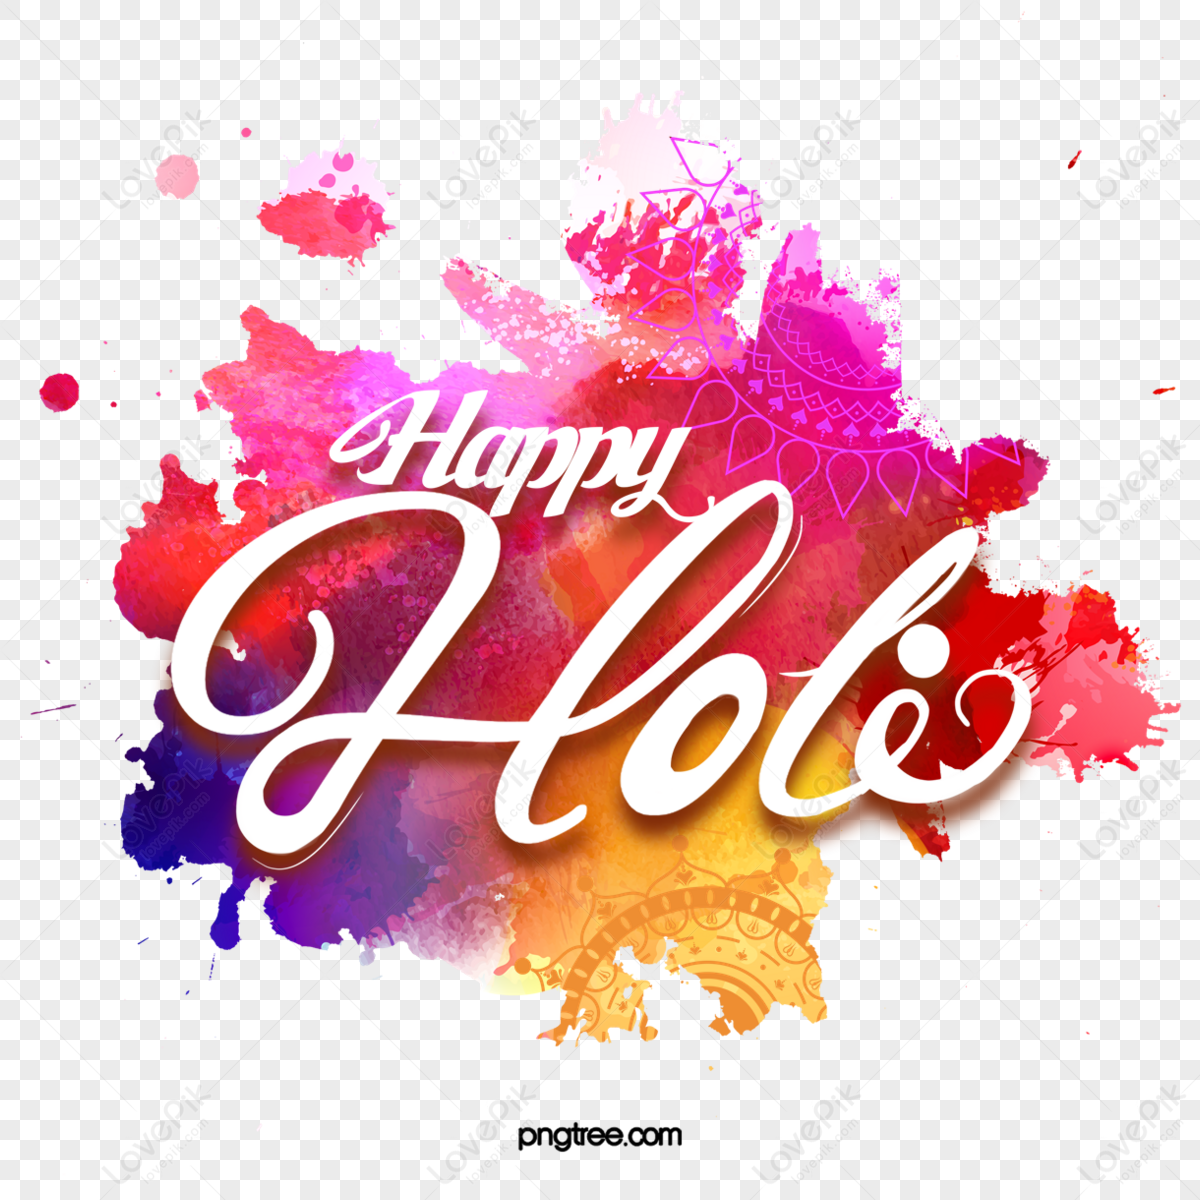 Download Premium Happy Holi colors gulal hindi calligraphy brush stroke  vector wishes card | CorelDraw Design (Download Free CDR, Vector, Stock  Images, Tutorials, Tips & Tricks)